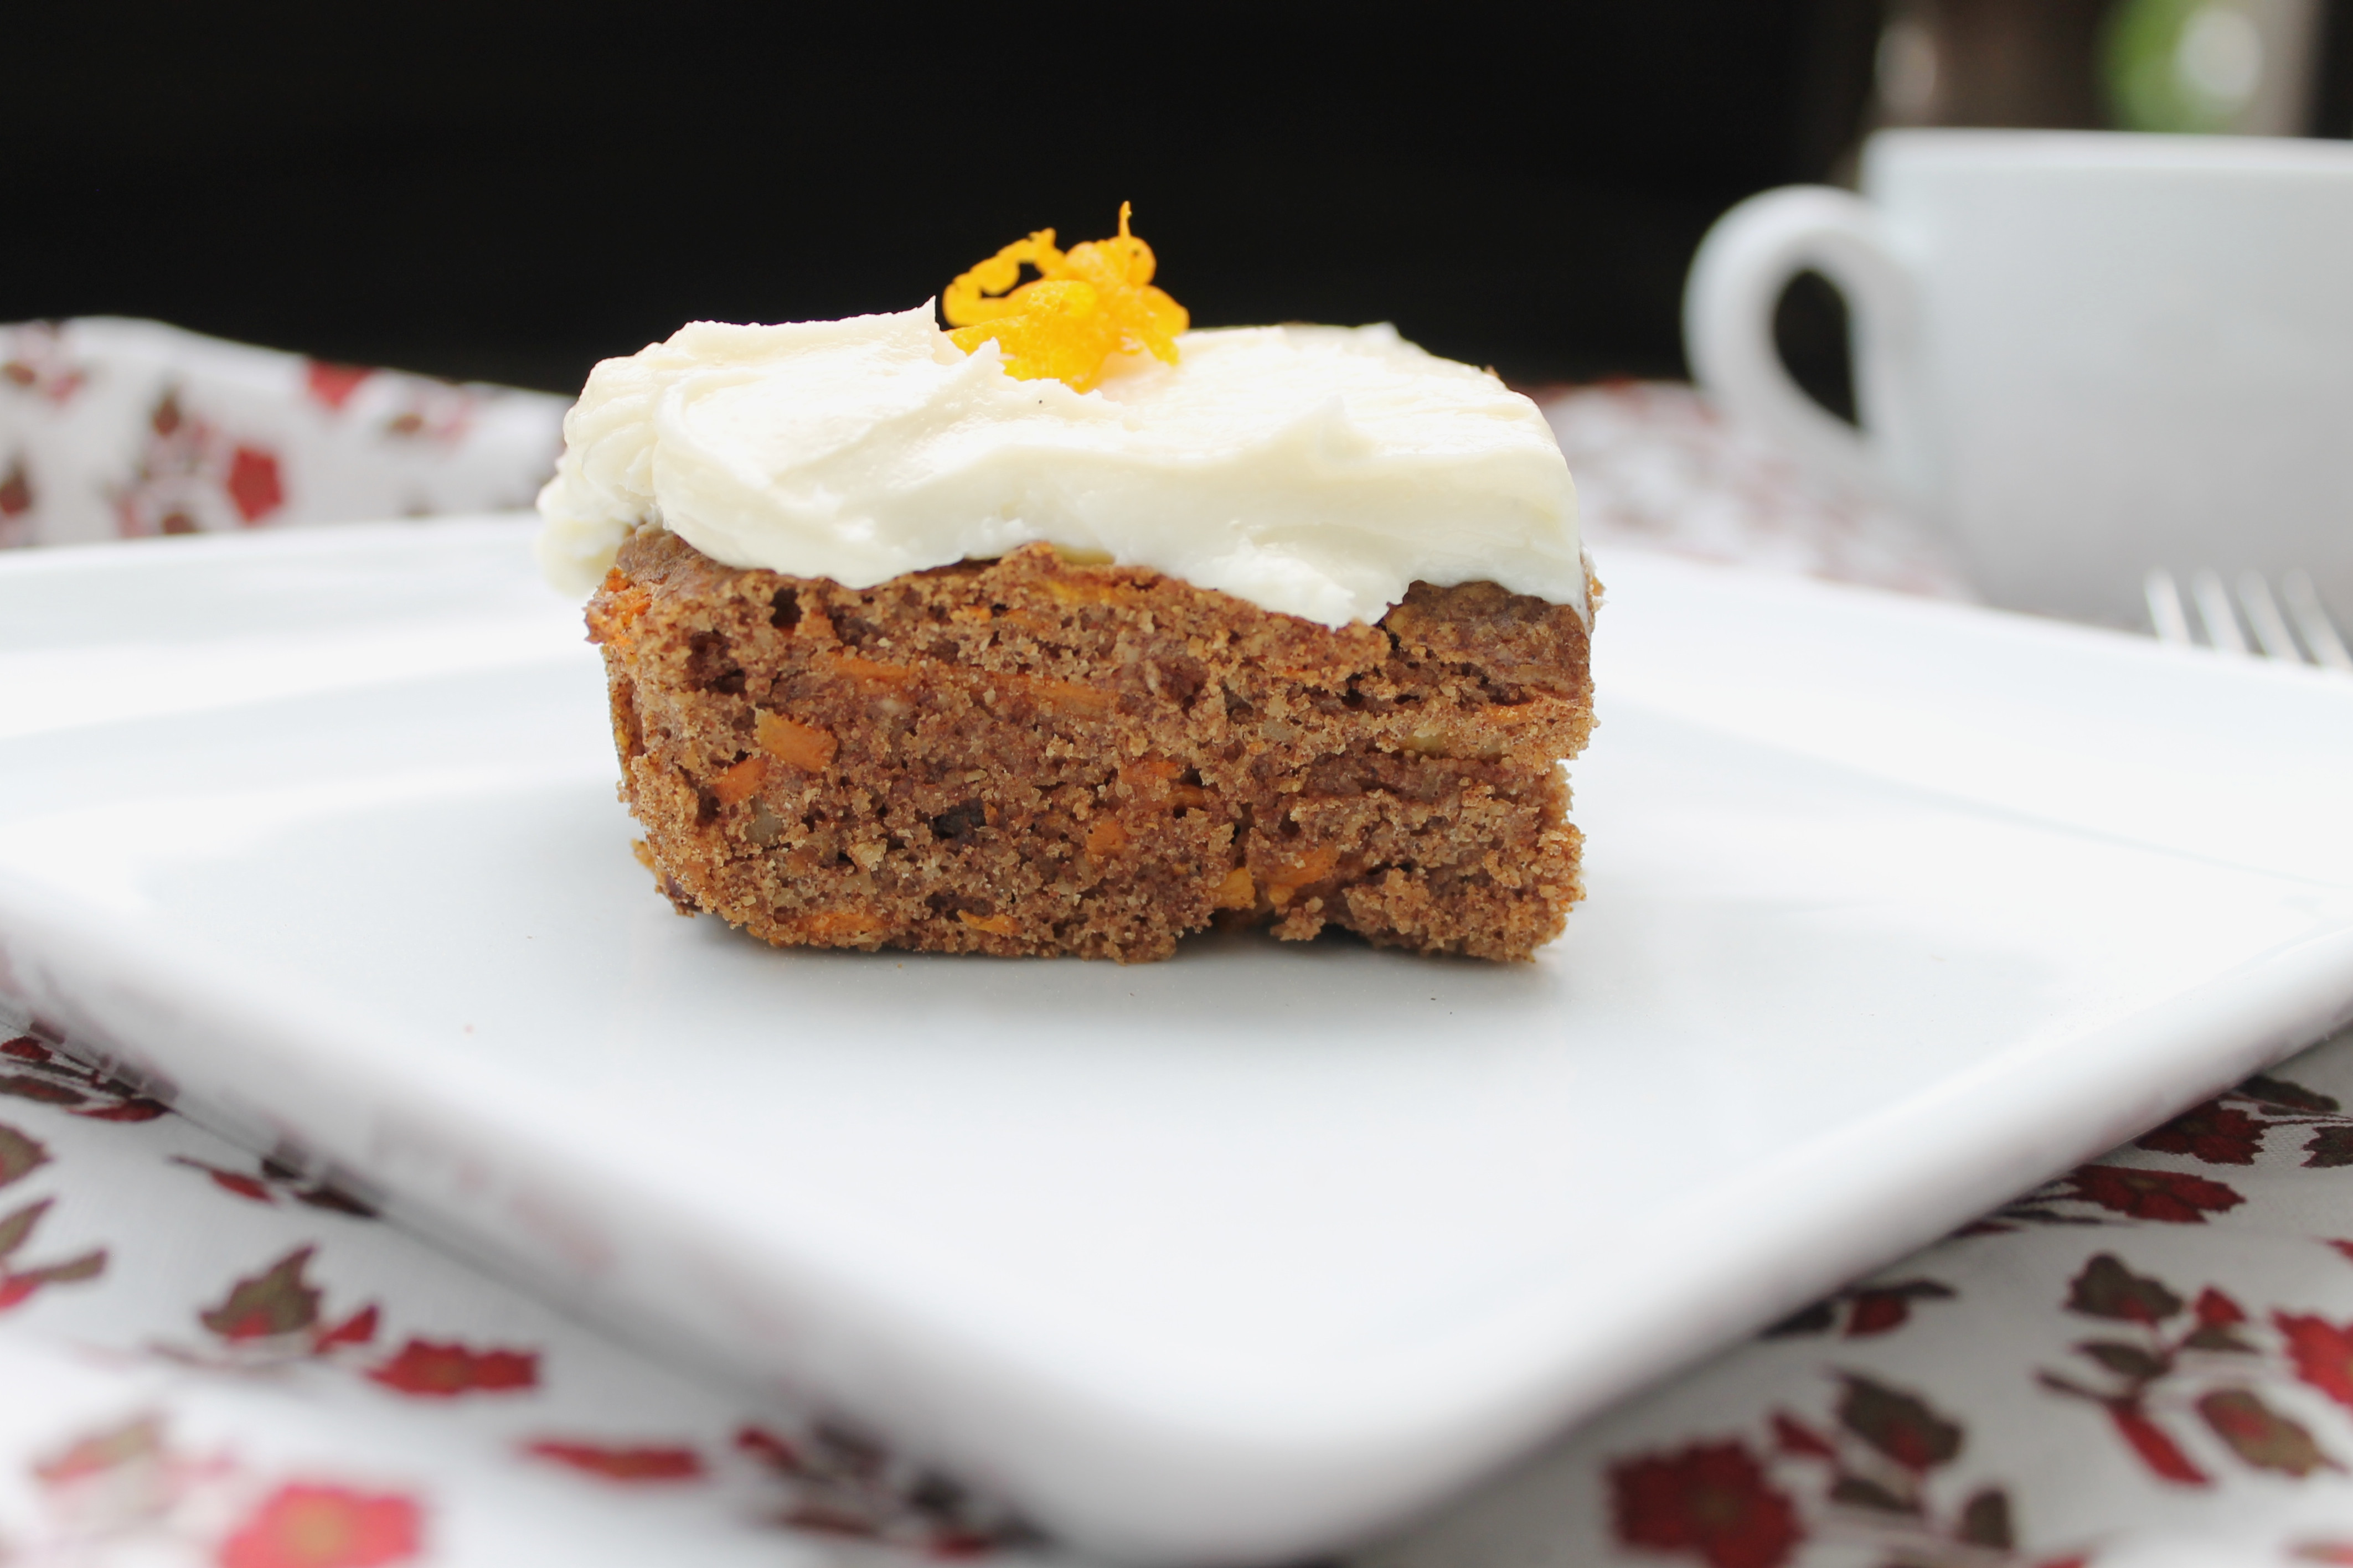 Dairy Free Carrot Cake Frosting
 Paleo Carrot Cake with Creamy Dairy Free Frosting